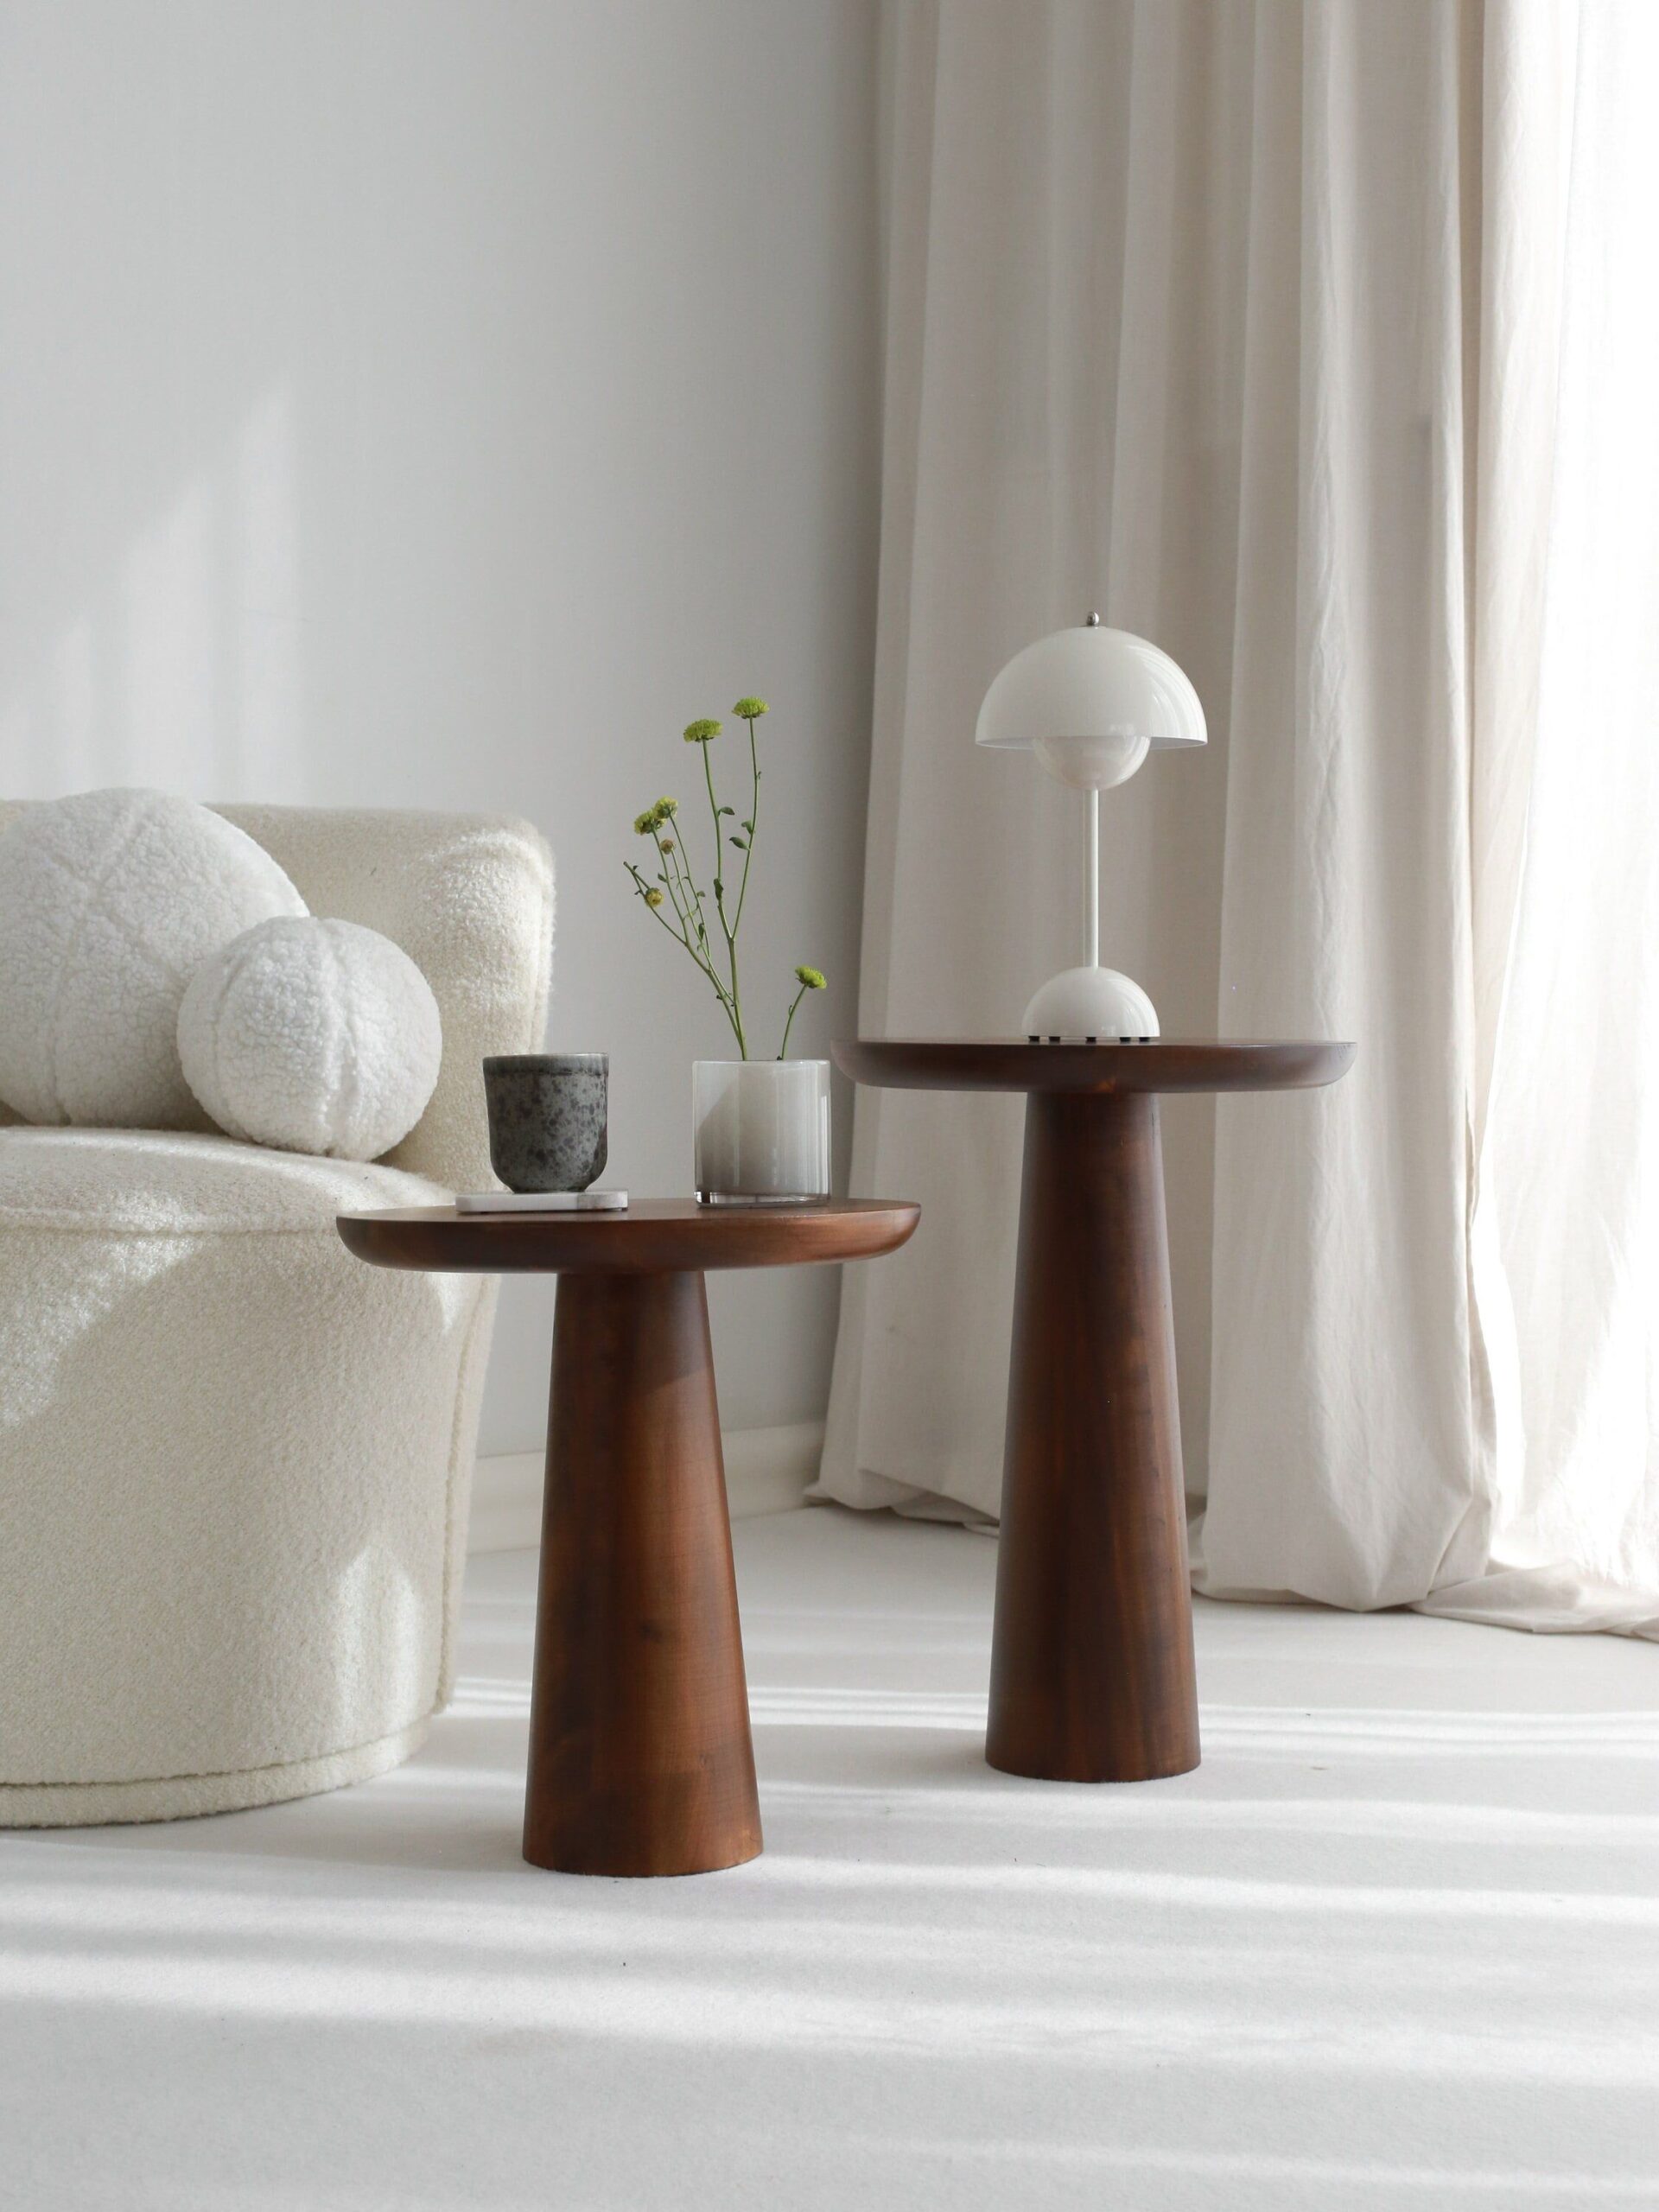 A Complete Collection: The Beauty of Coffee Table Sets